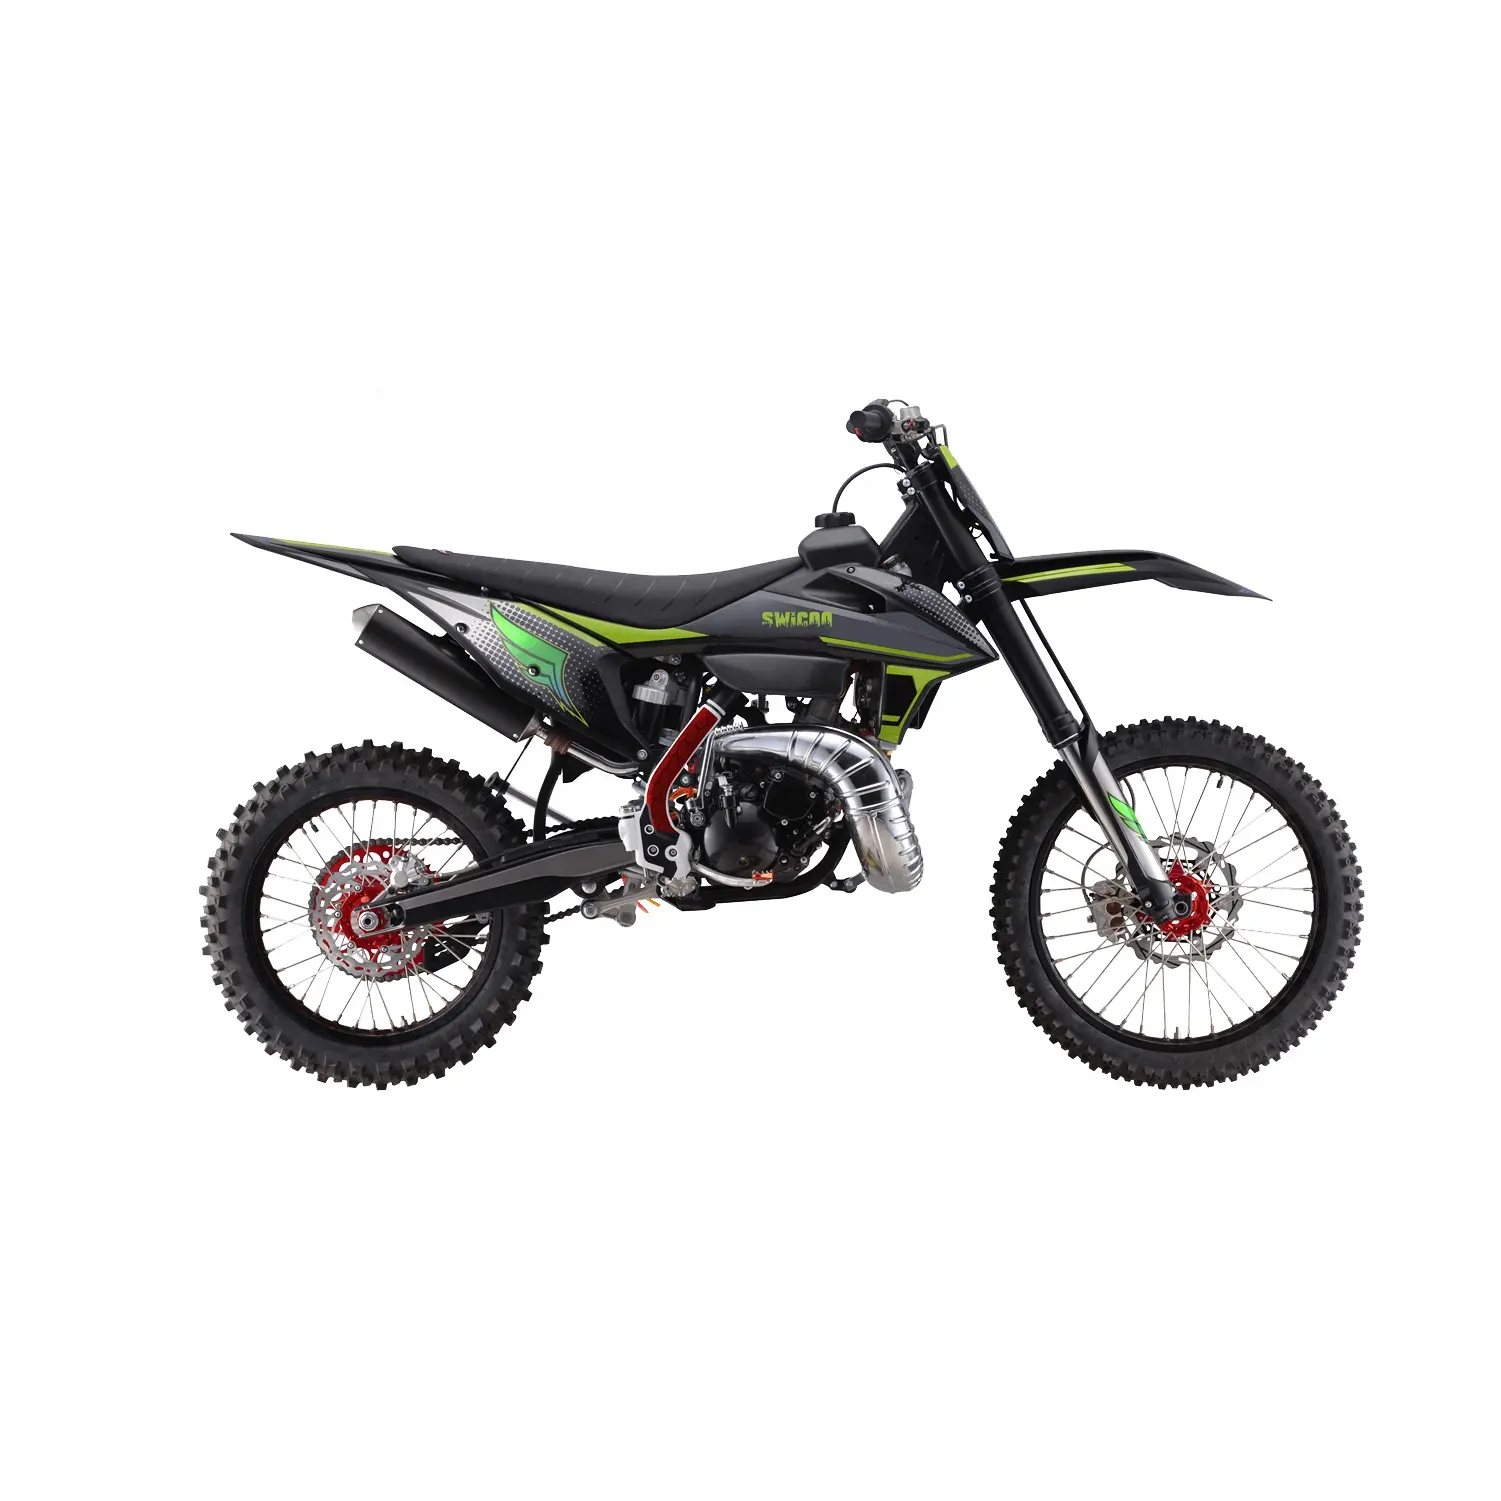 Stock high performance 2 stroke 250cc dirt bike off-road motorcycles custom made decals